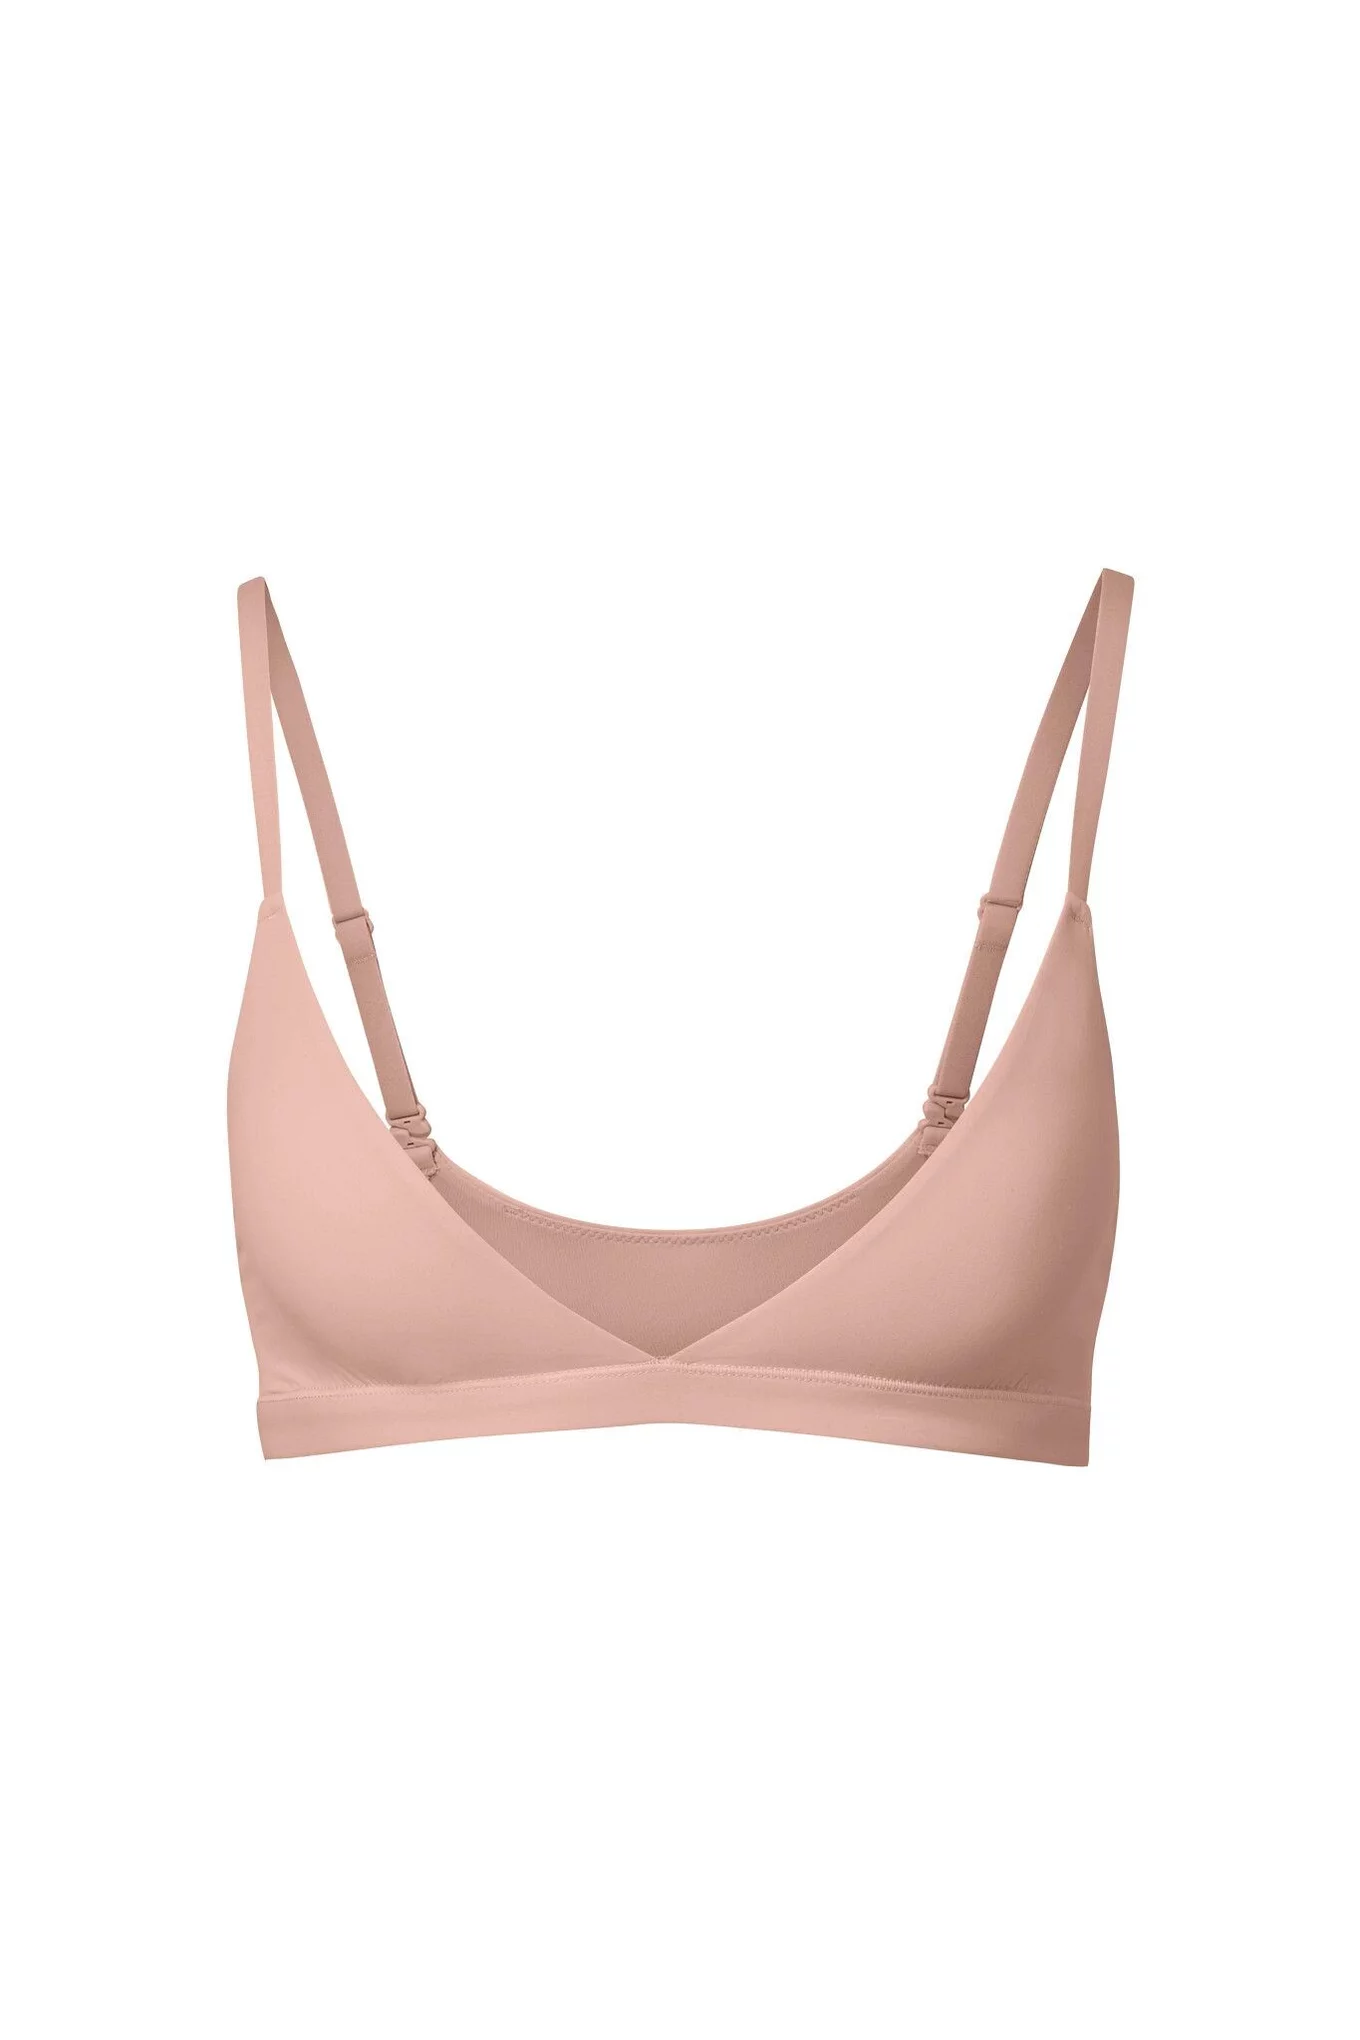 MyRunway  Shop JT One Pink Lace Padded Bralette for Women from